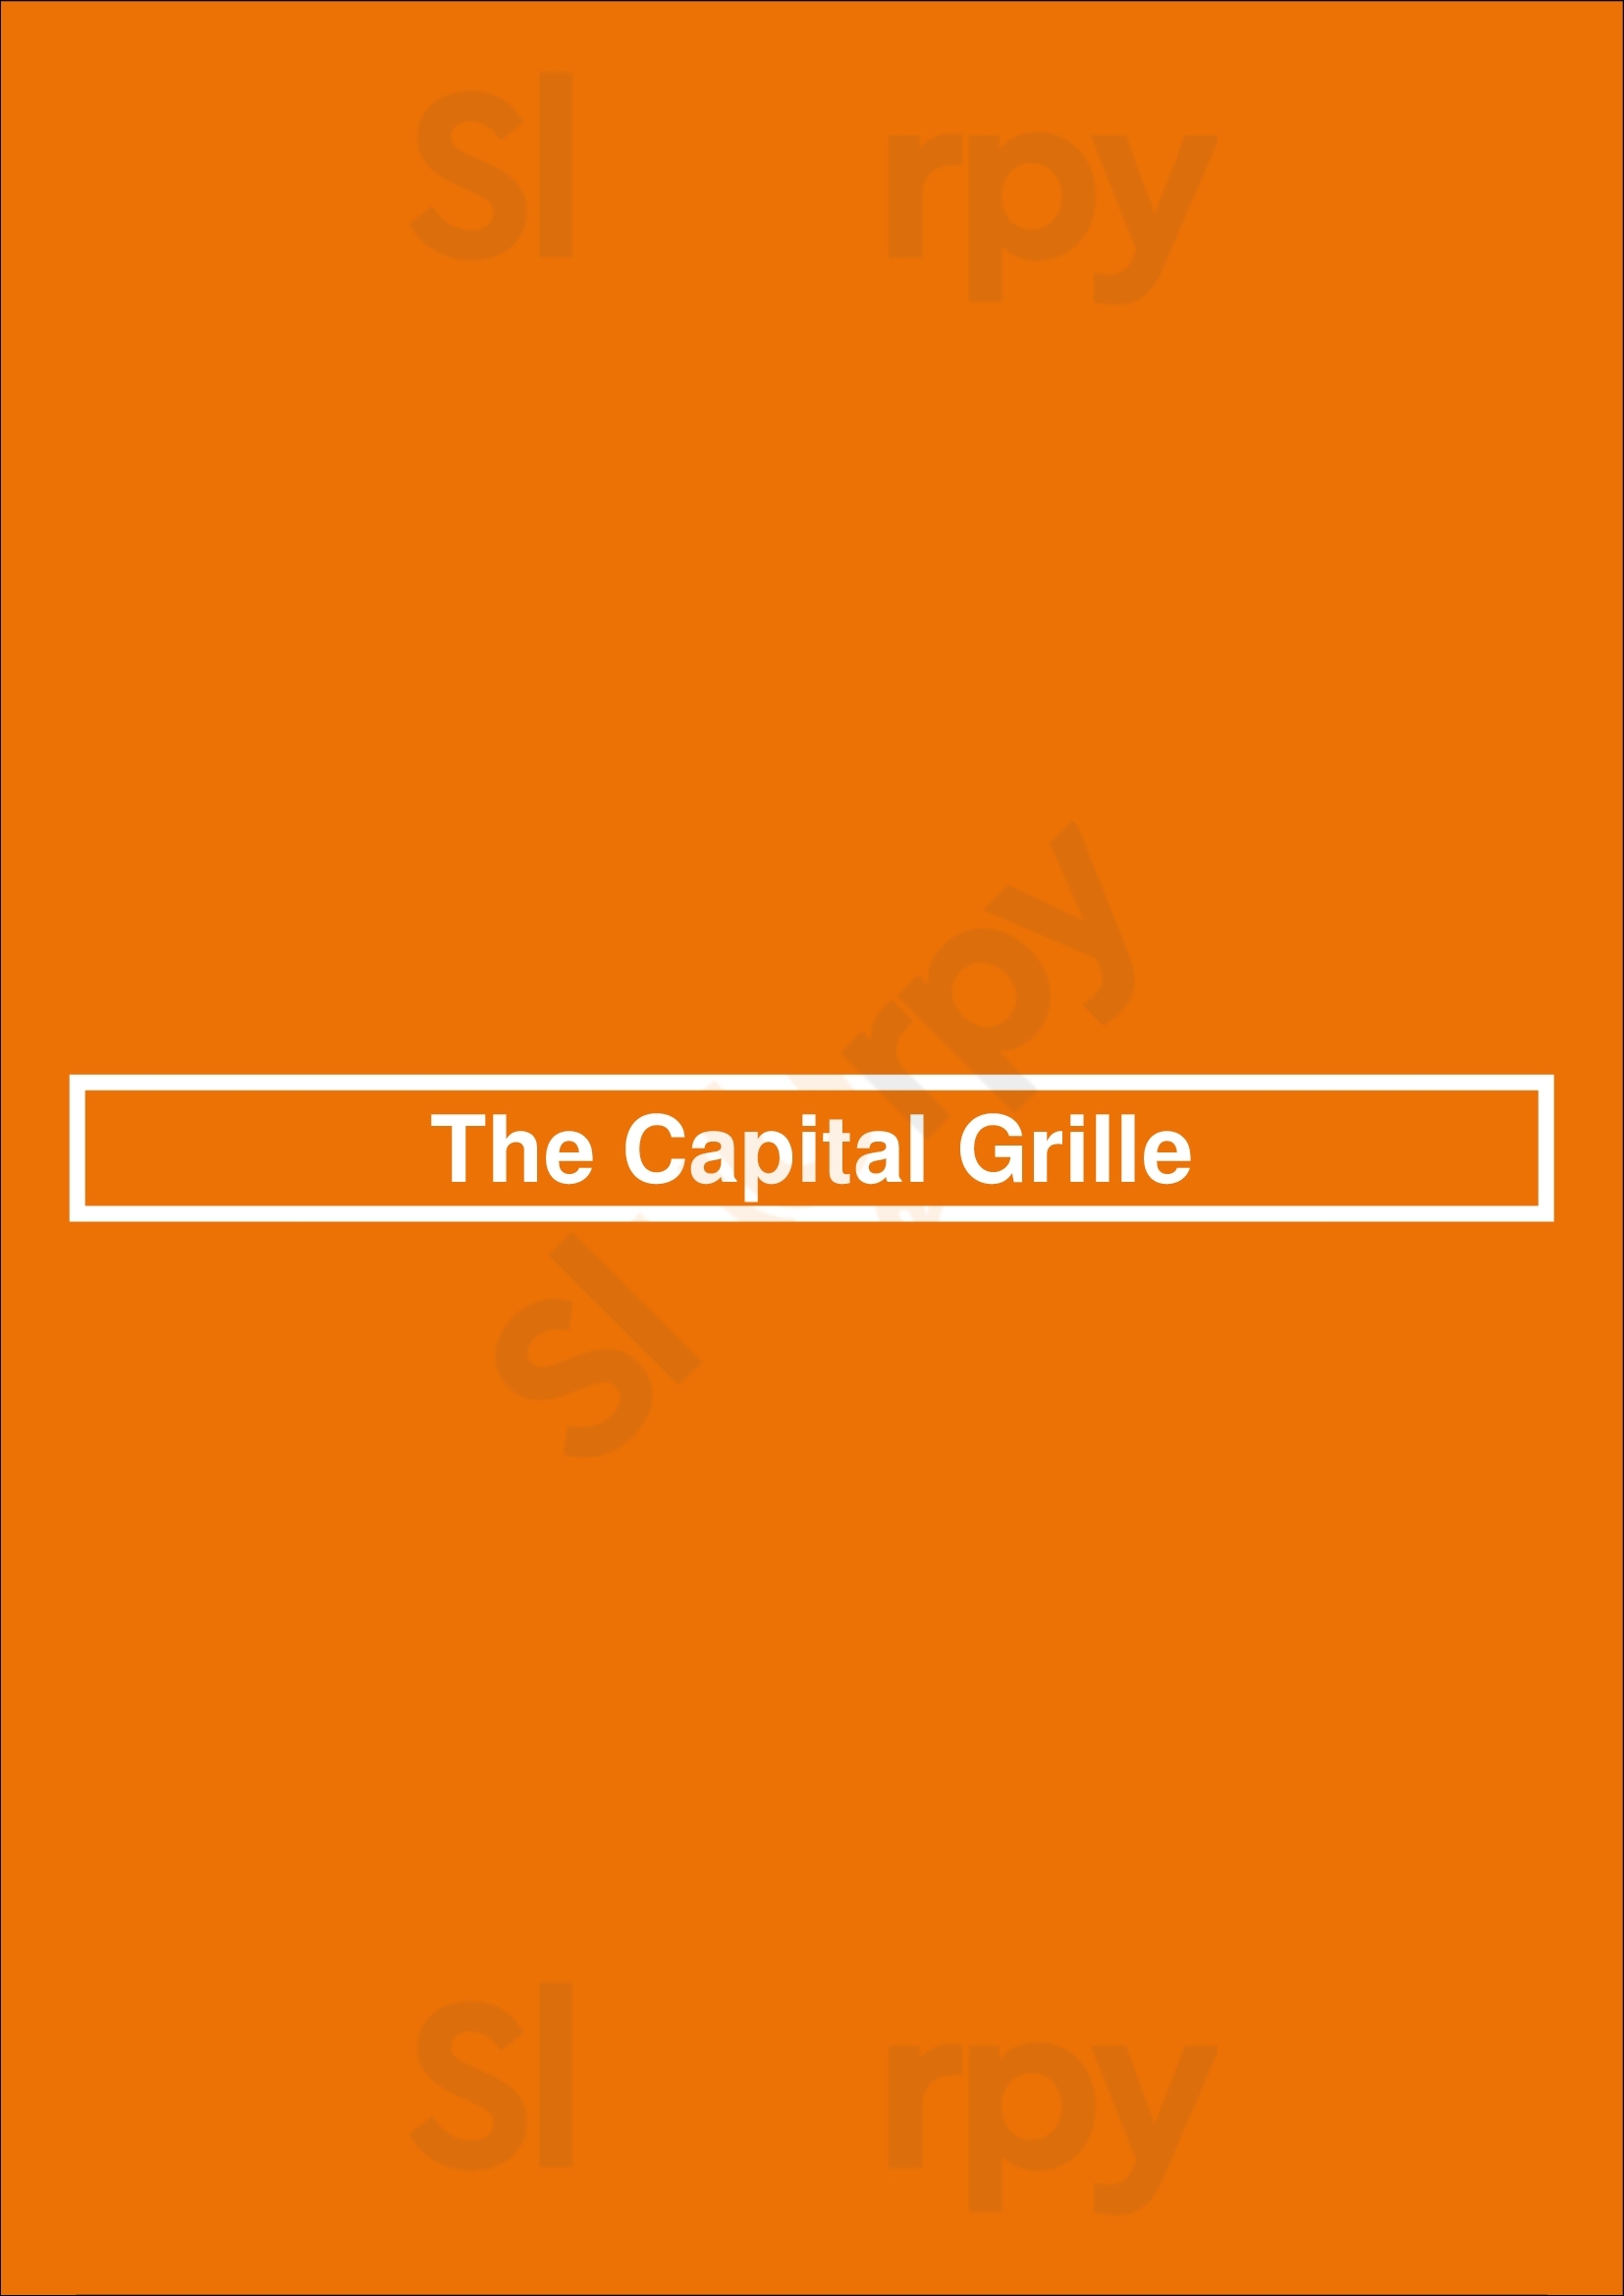 The Capital Grille Raleigh Menu - 1